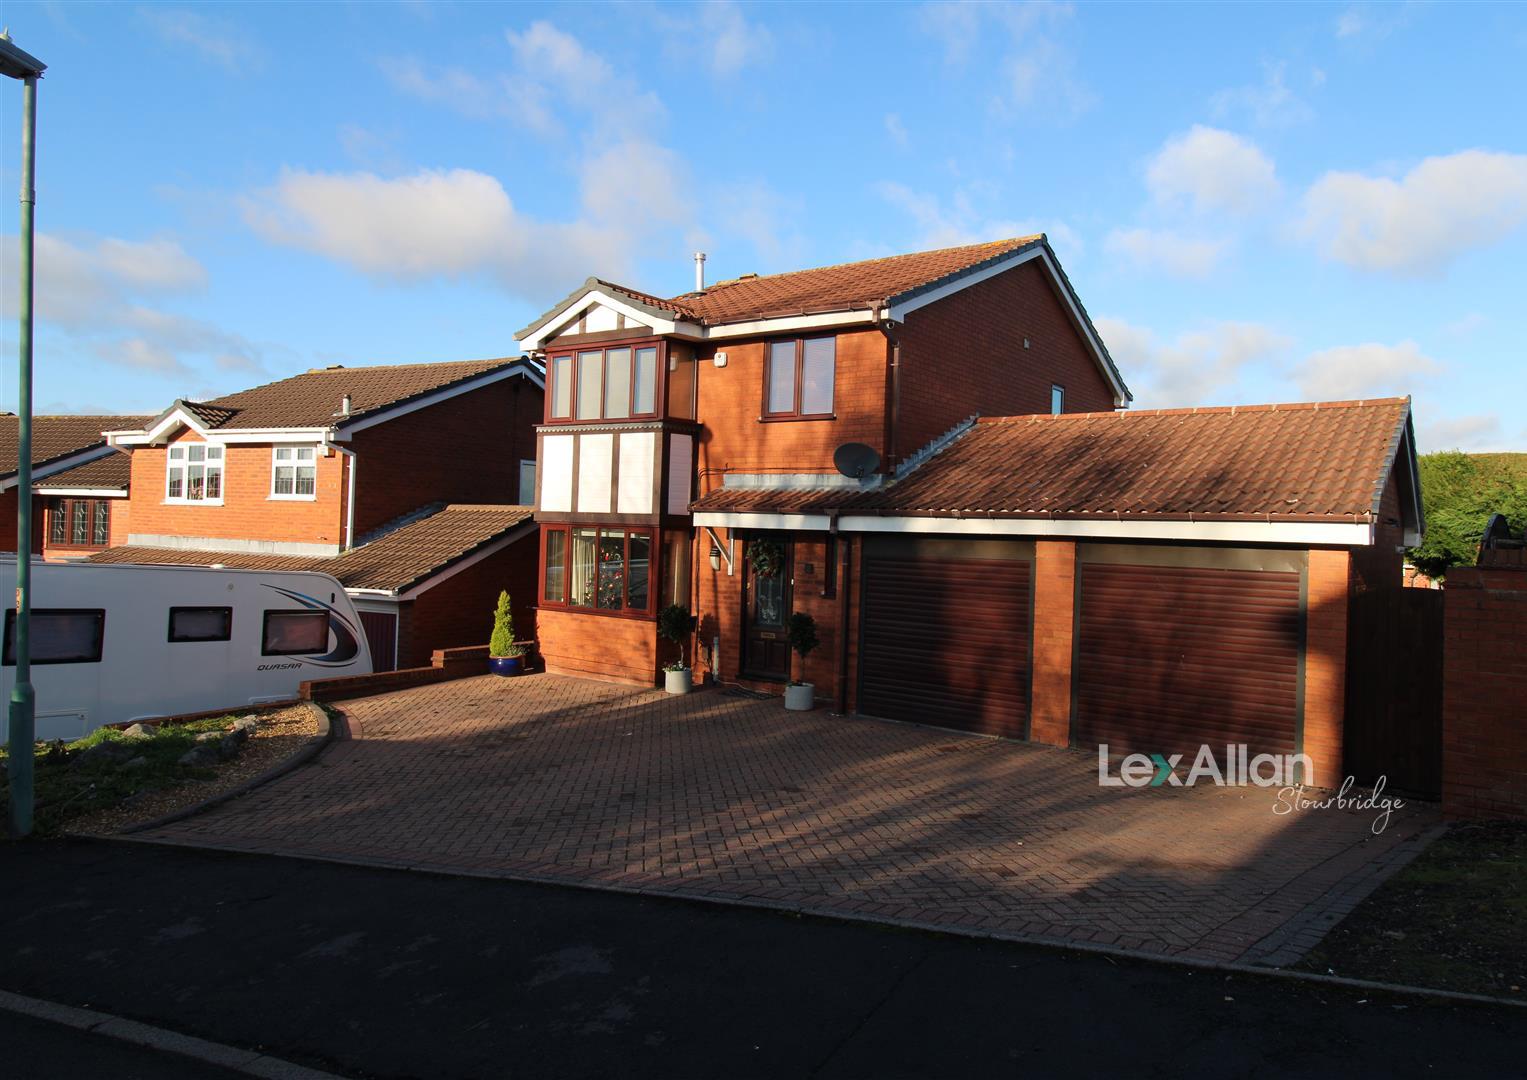 4 bed detached house for sale in Lythwood Drive, Brierley Hill, DY5 